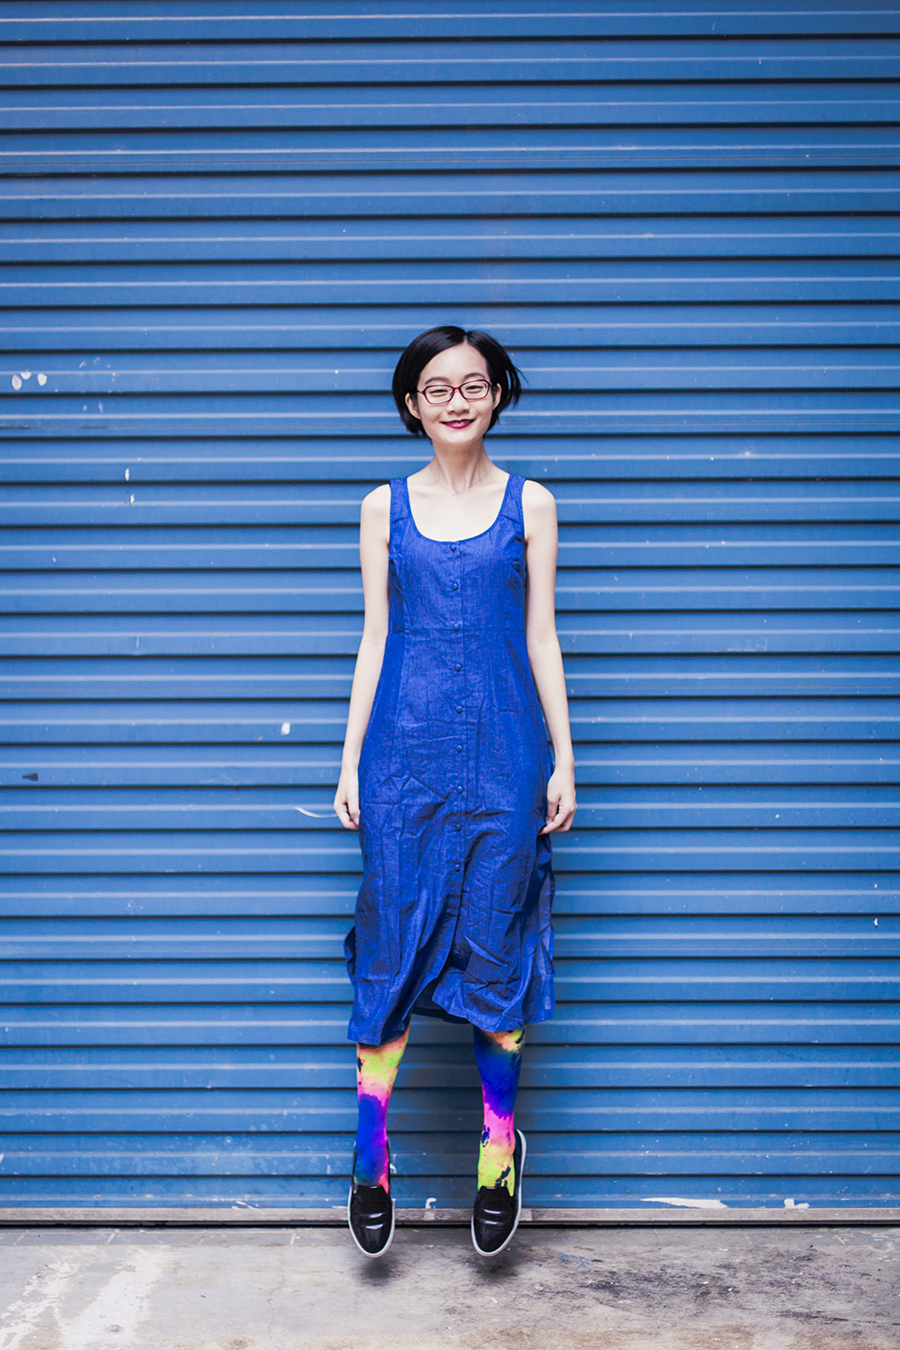 Blue outfit: Zalora Love Button Front Midi Dress, We Love Colors splash color thigh high socks, Zalora black shoes, Firmoo red glasses.